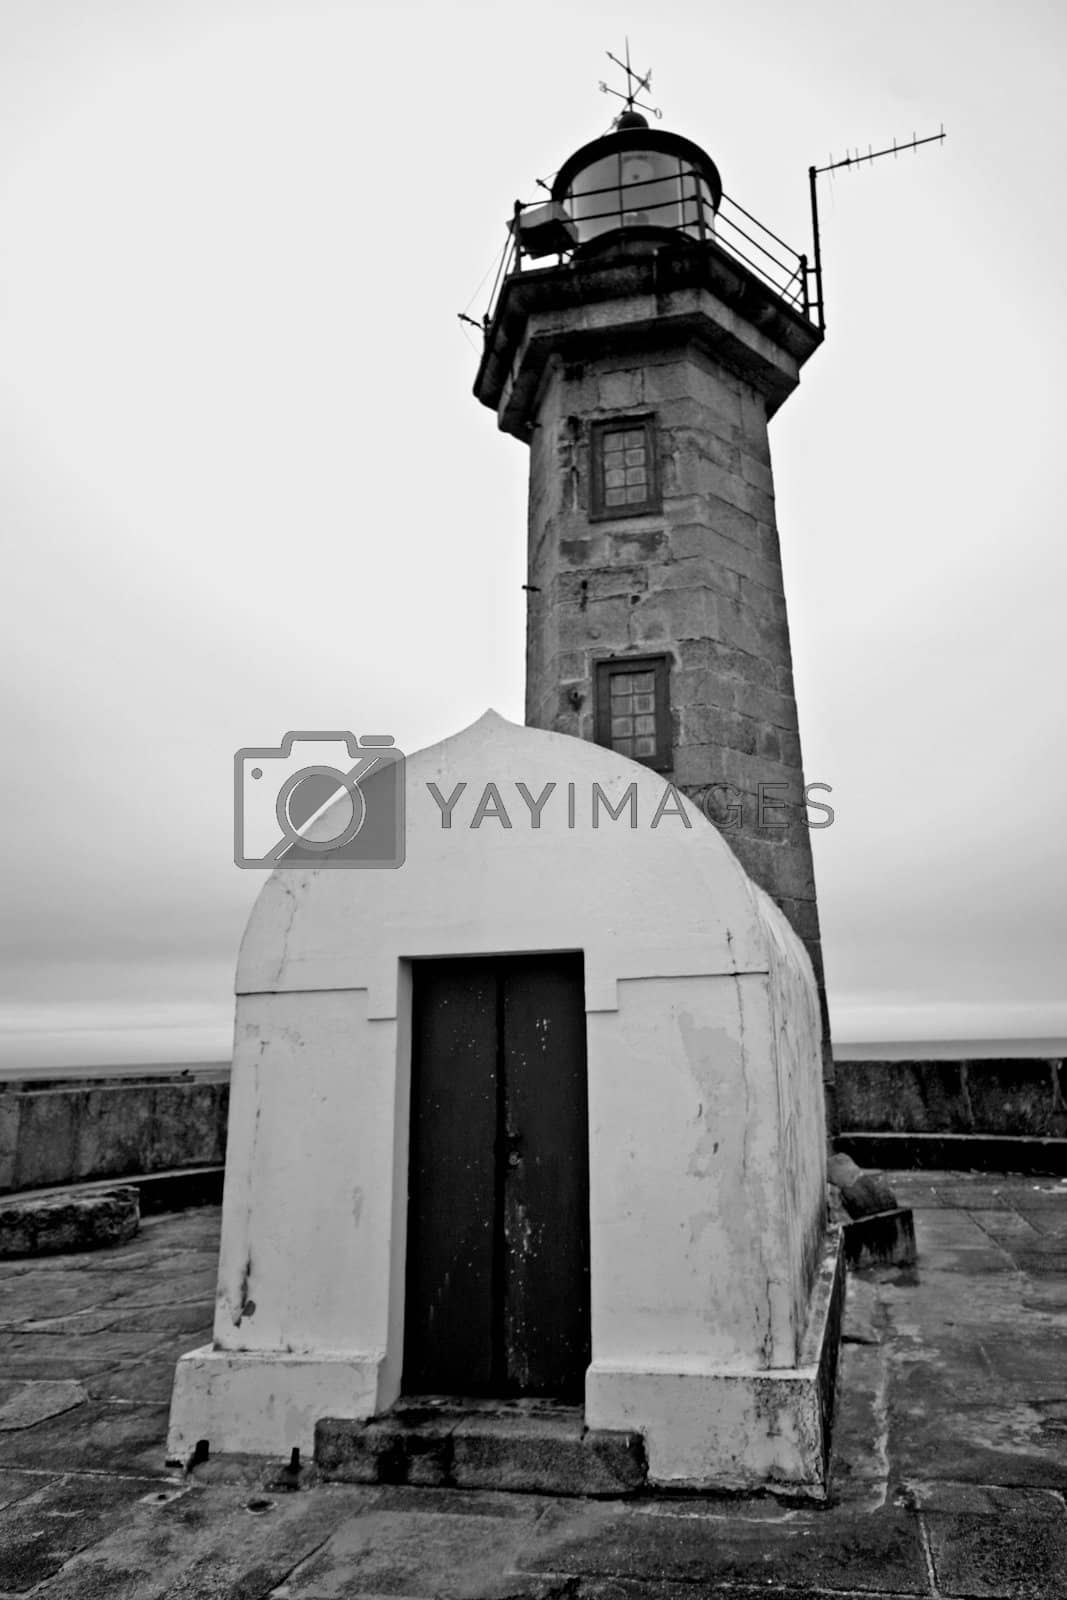 Royalty free image of Lighthouse, Foz do Douro, Portugal by jpcasais